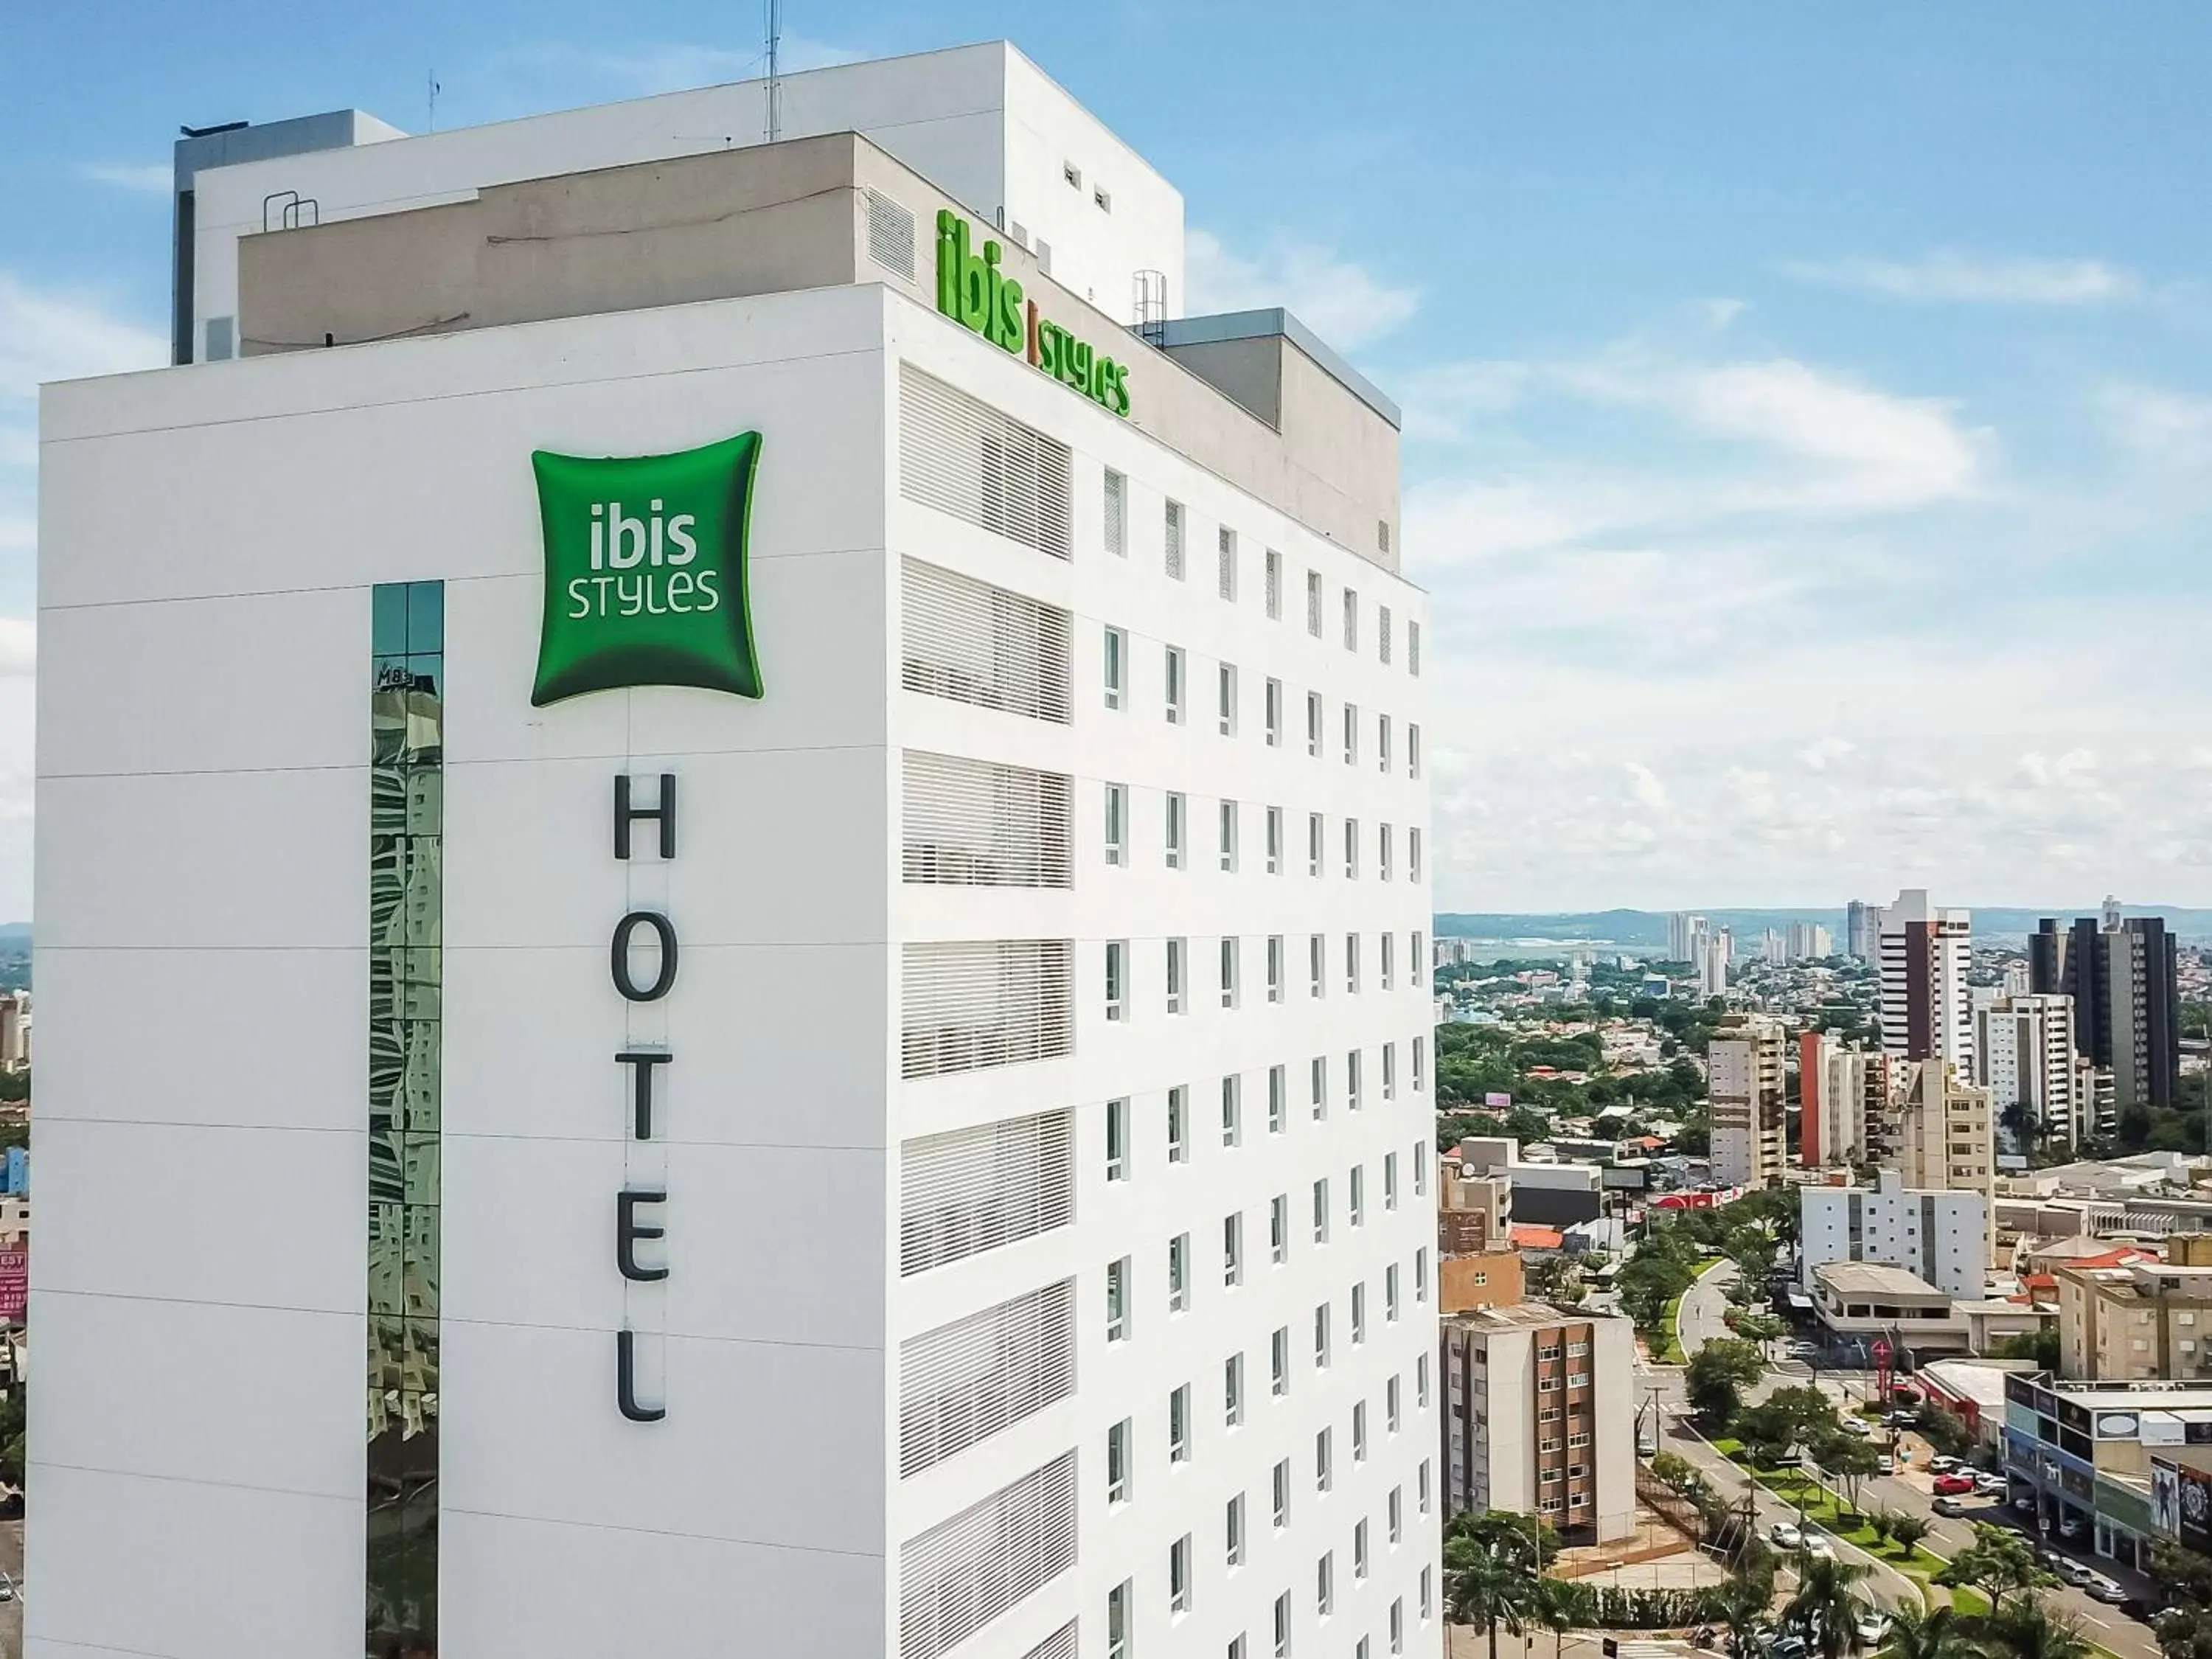 On site, Property Building in ibis Styles Goiania Marista